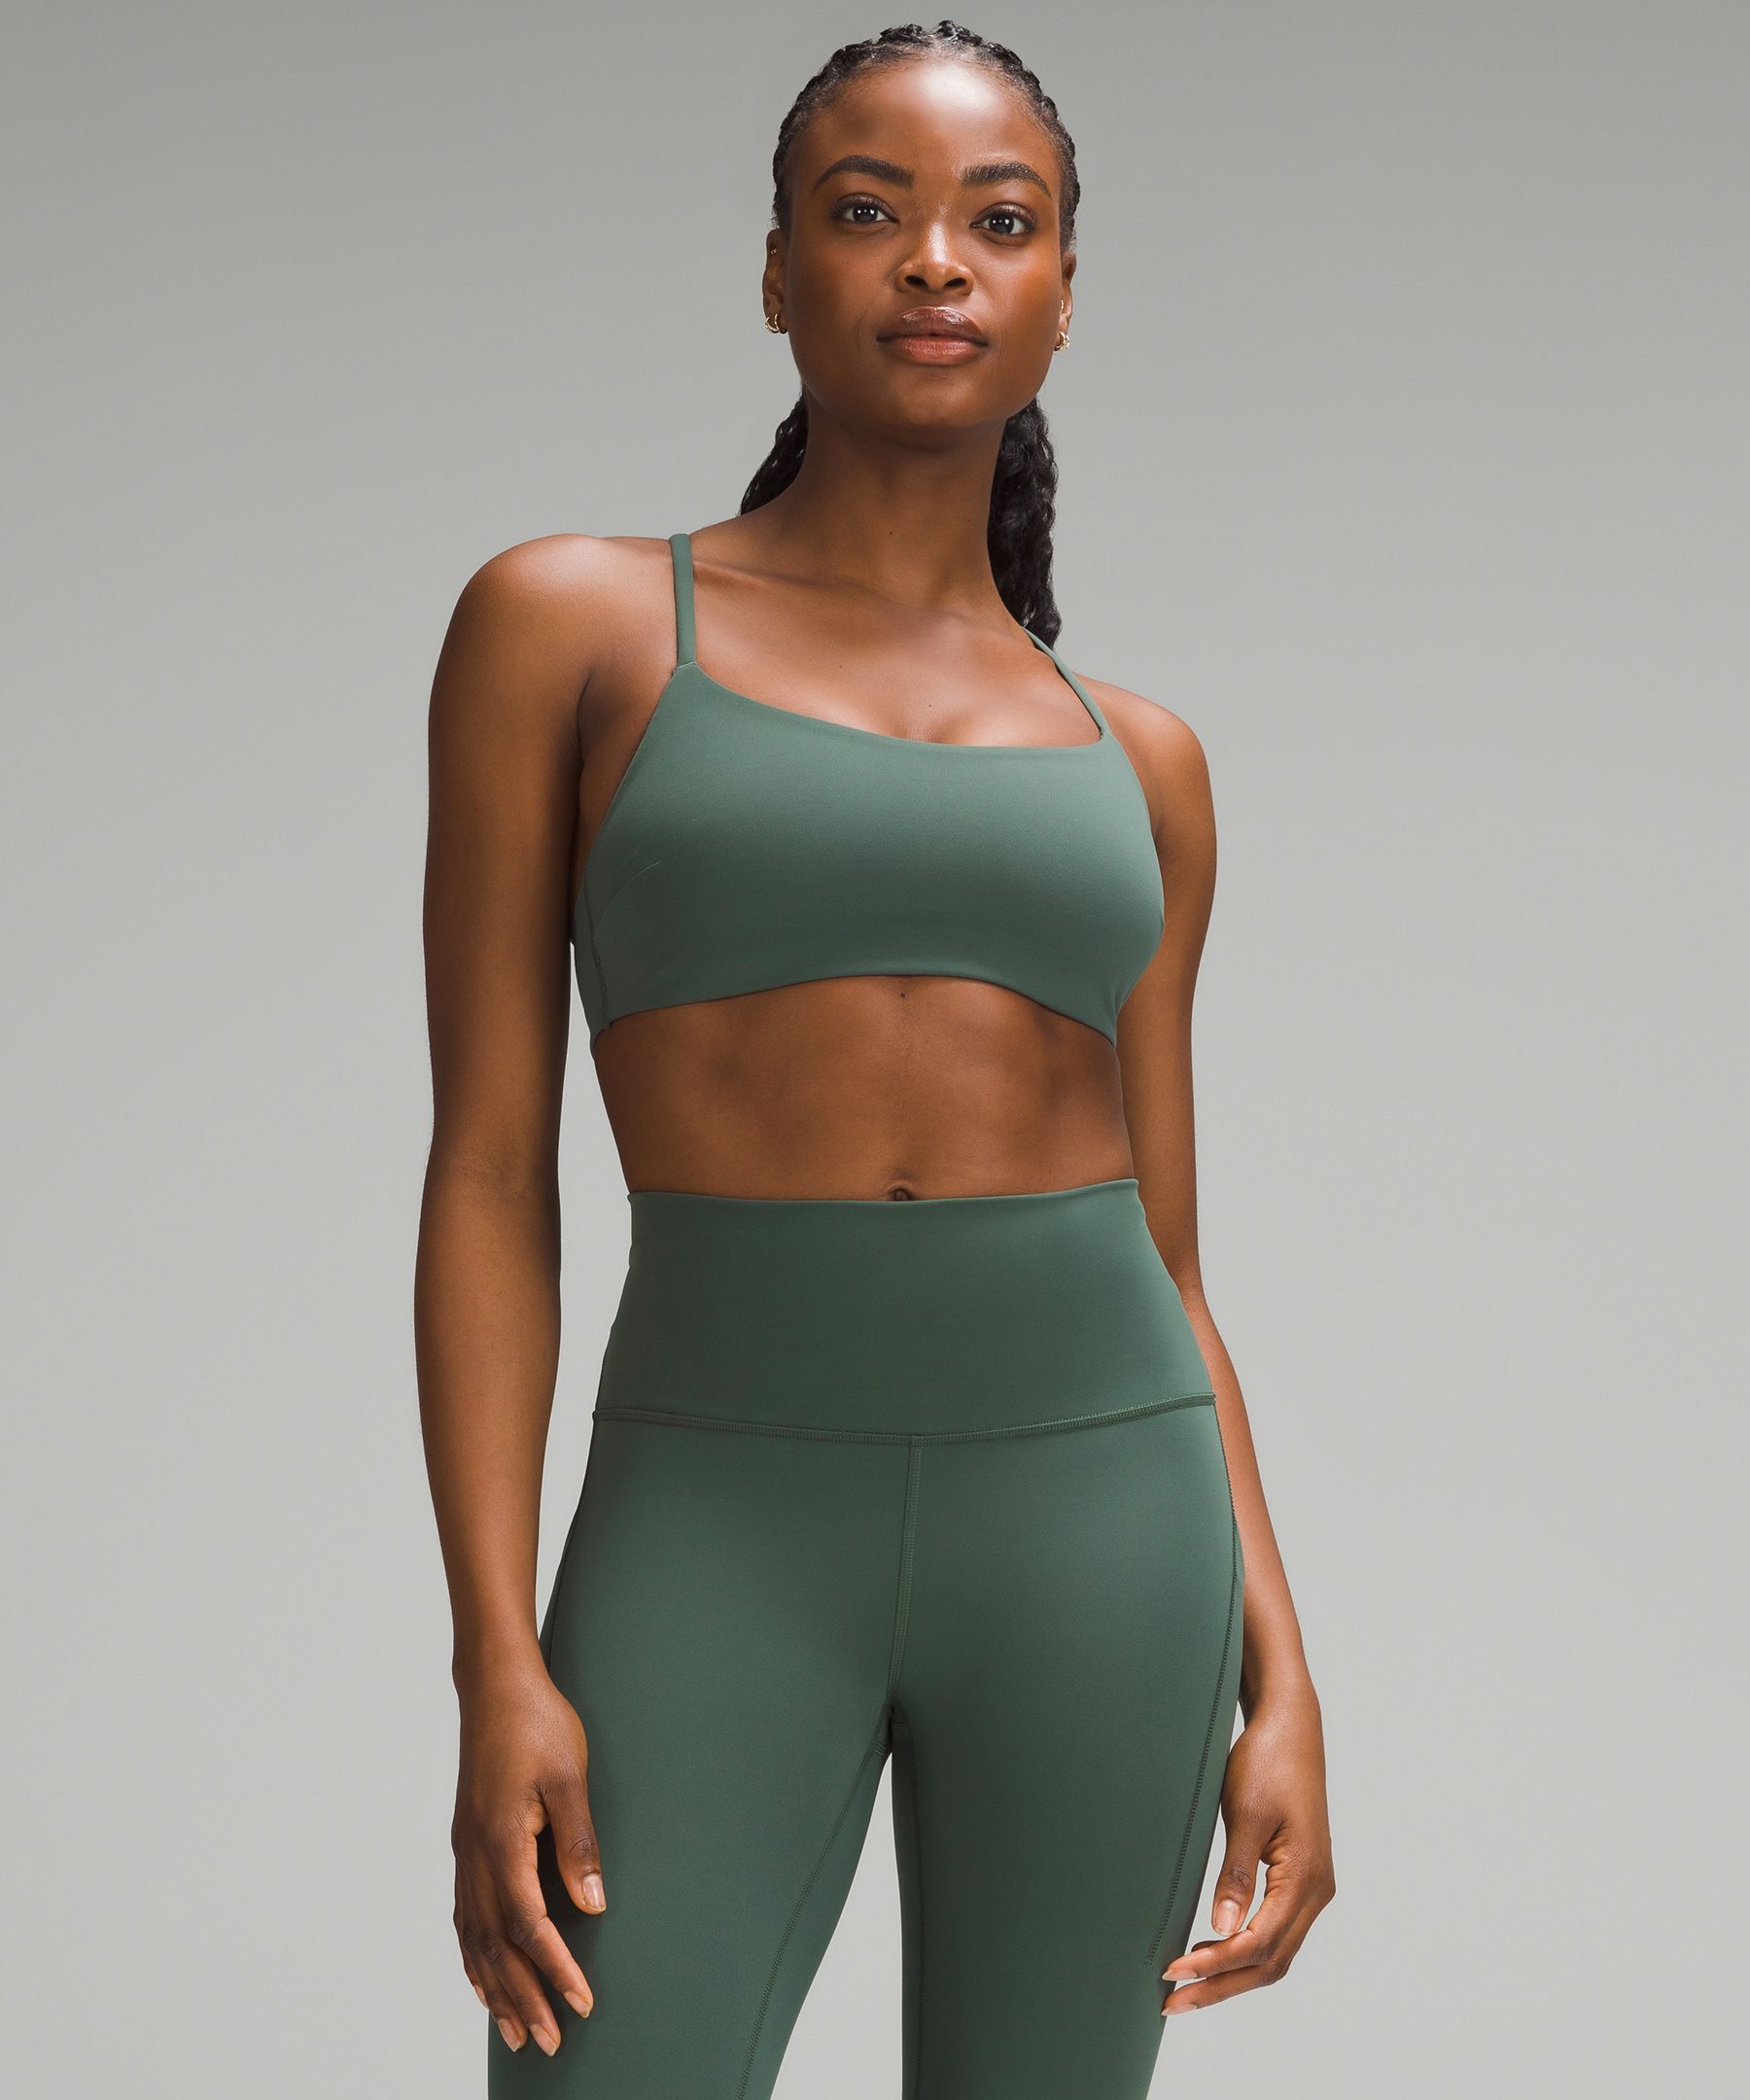 I Swapped All My Sports Bras for These 2-in-1 Lululemon Align Tank Tops